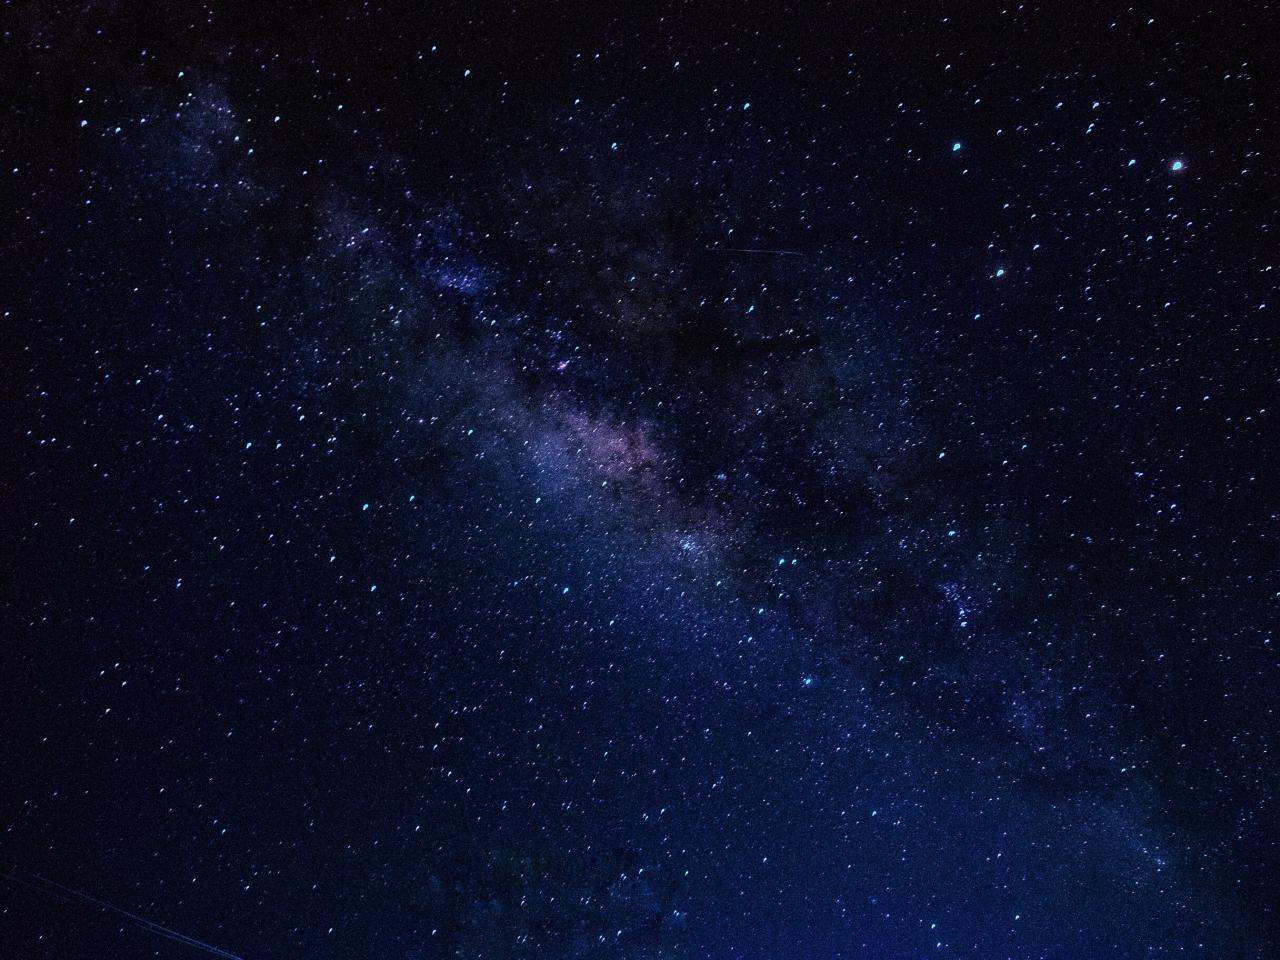 Night Sky Images | Free HD Backgrounds, PNGs, Vectors & Templates - rawpixel